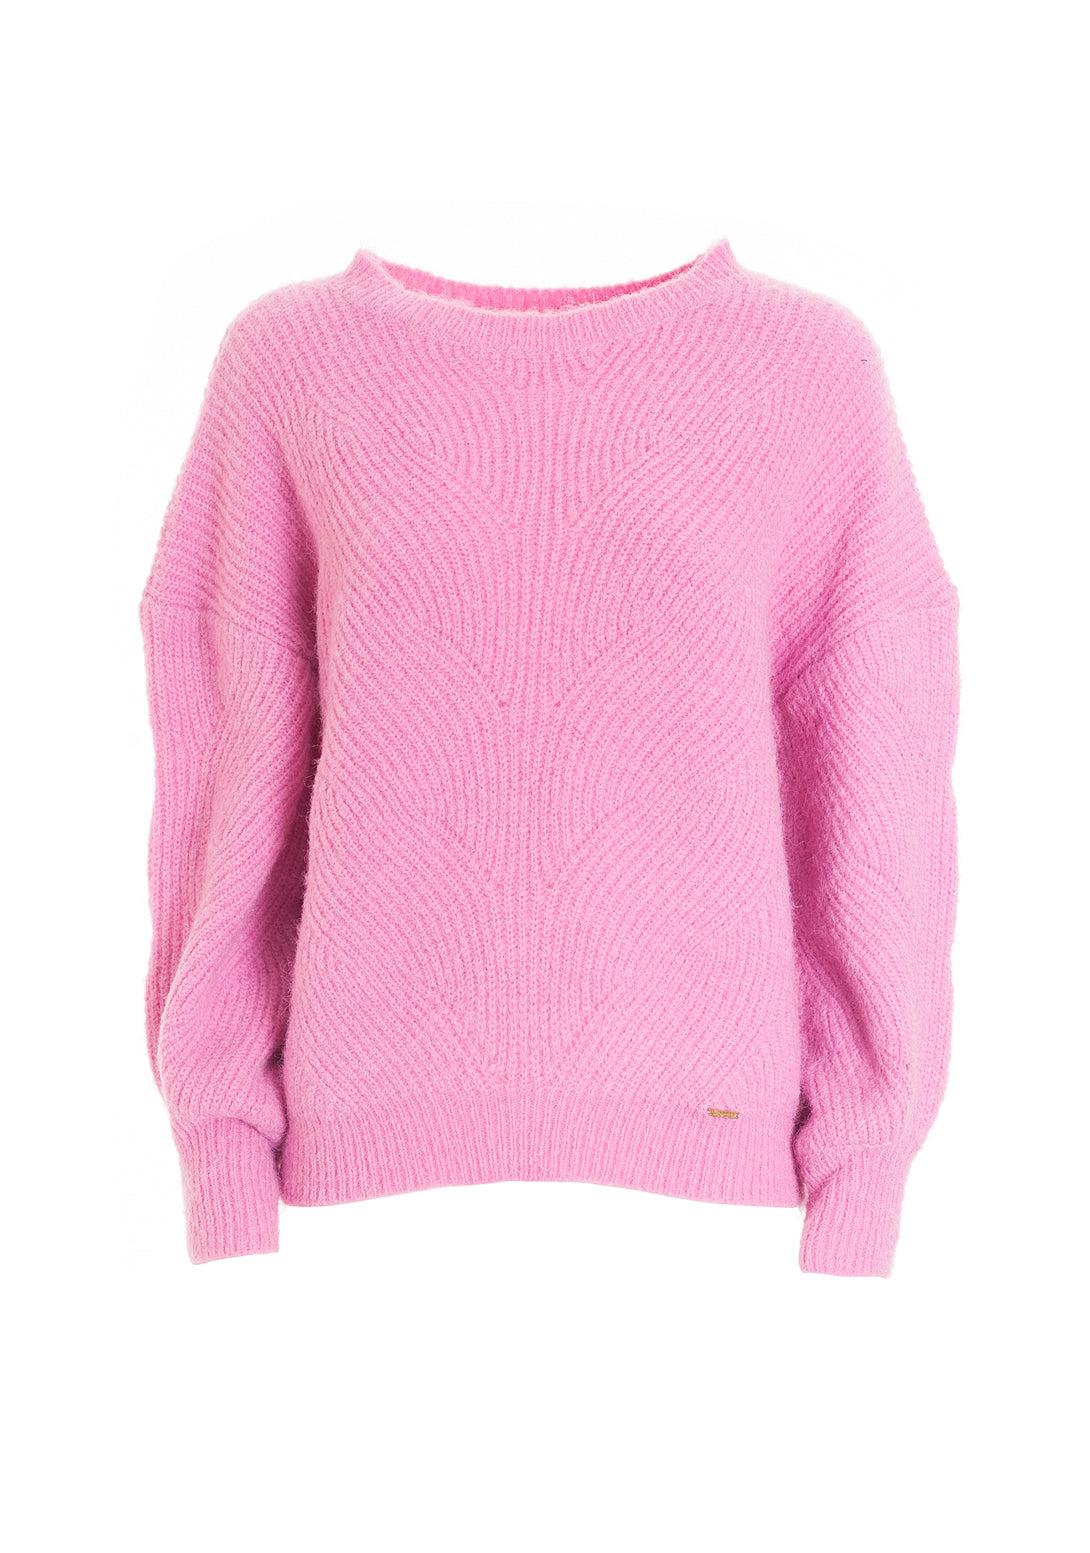 Knitwear over fit round neck